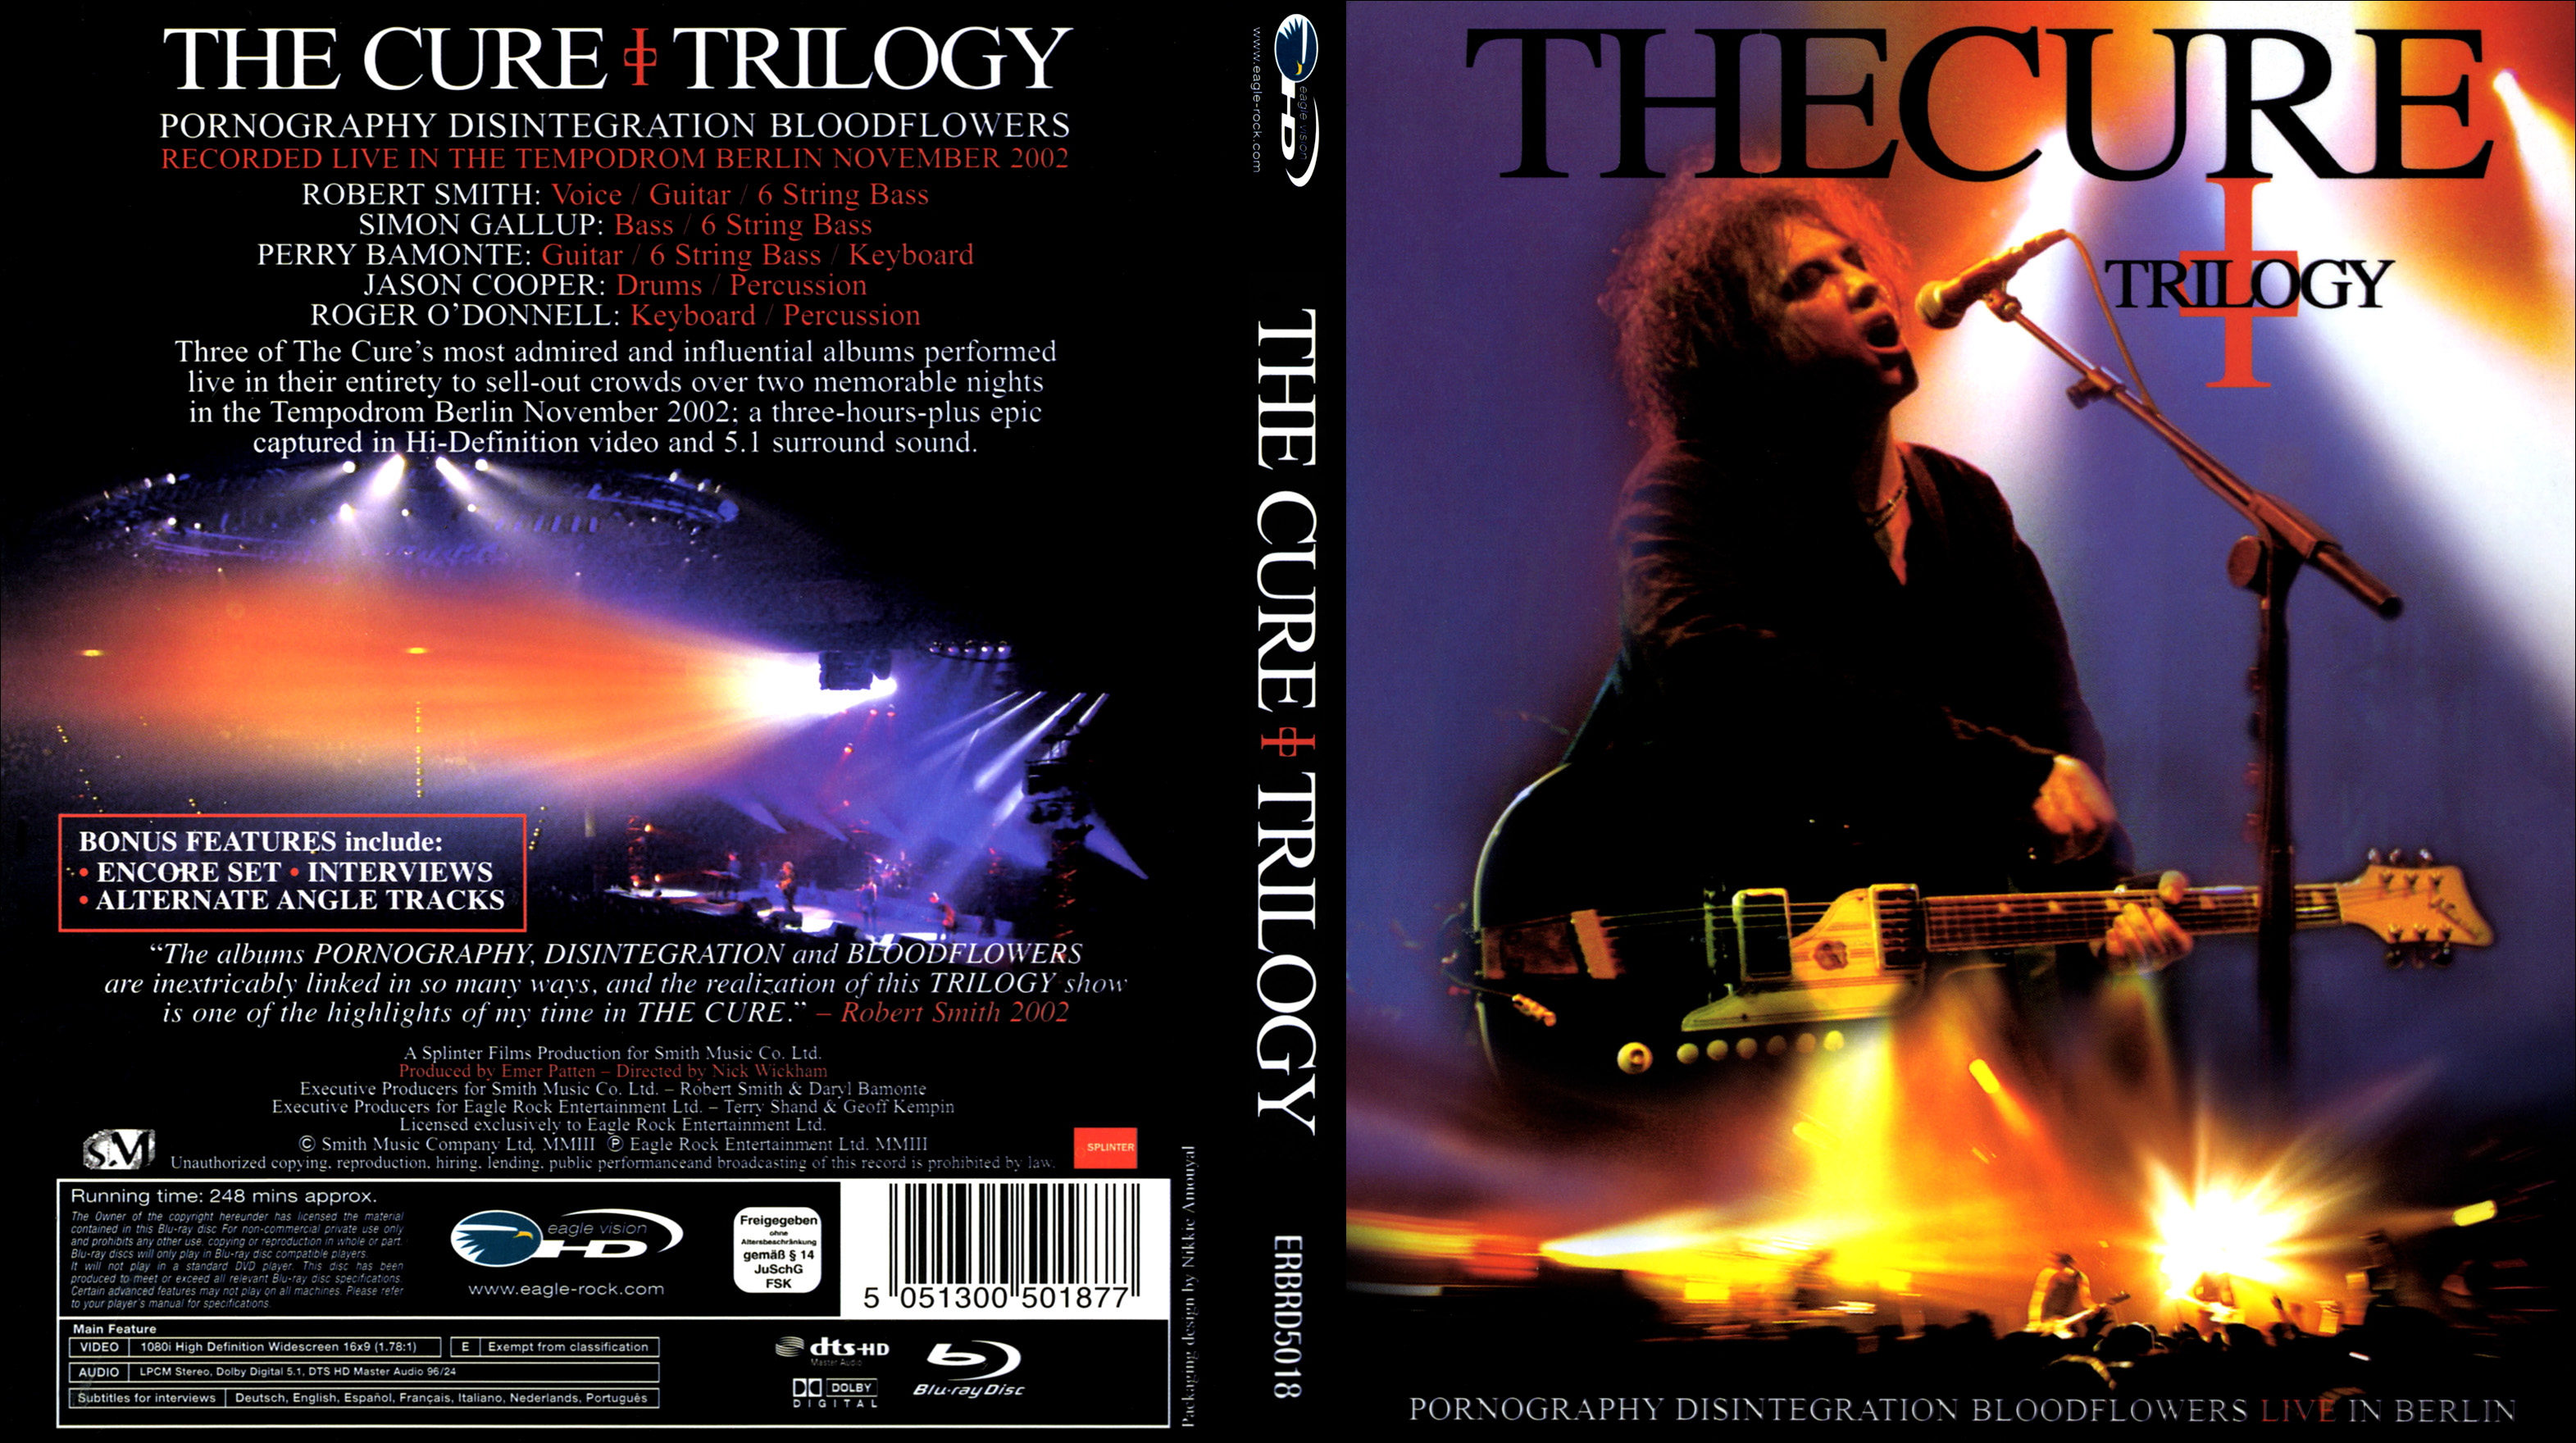 Jaquette DVD The Cure - Trilogy (BLU-RAY)